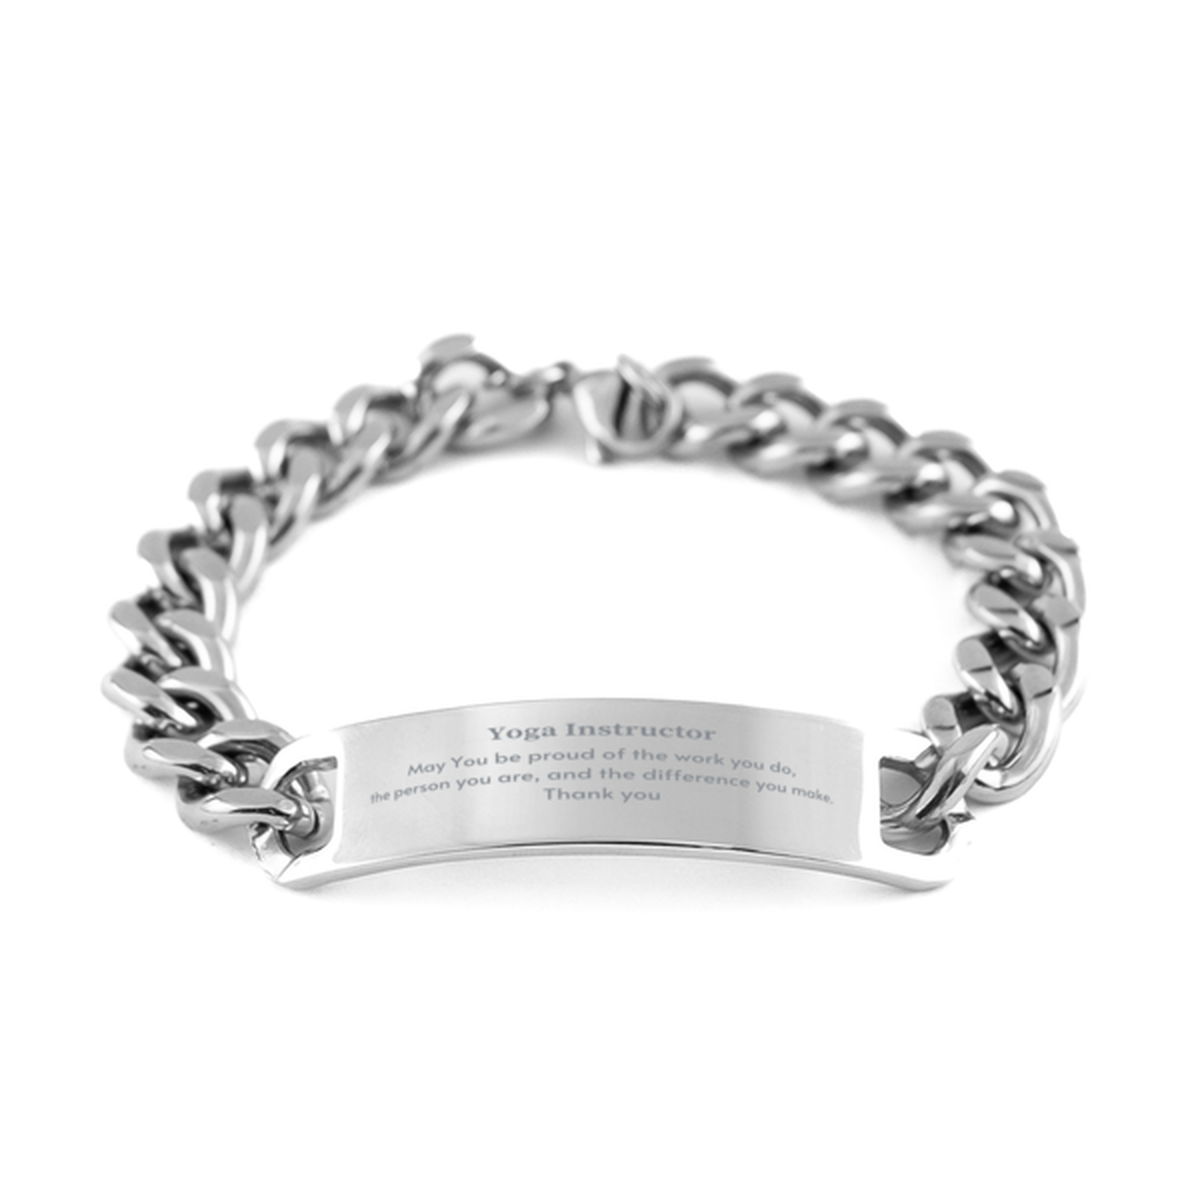 Heartwarming Cuban Chain Stainless Steel Bracelet Retirement Coworkers Gifts for Yoga Instructor, Yoga Instructor May You be proud of the work you do, the person you are Gifts for Boss Men Women Friends